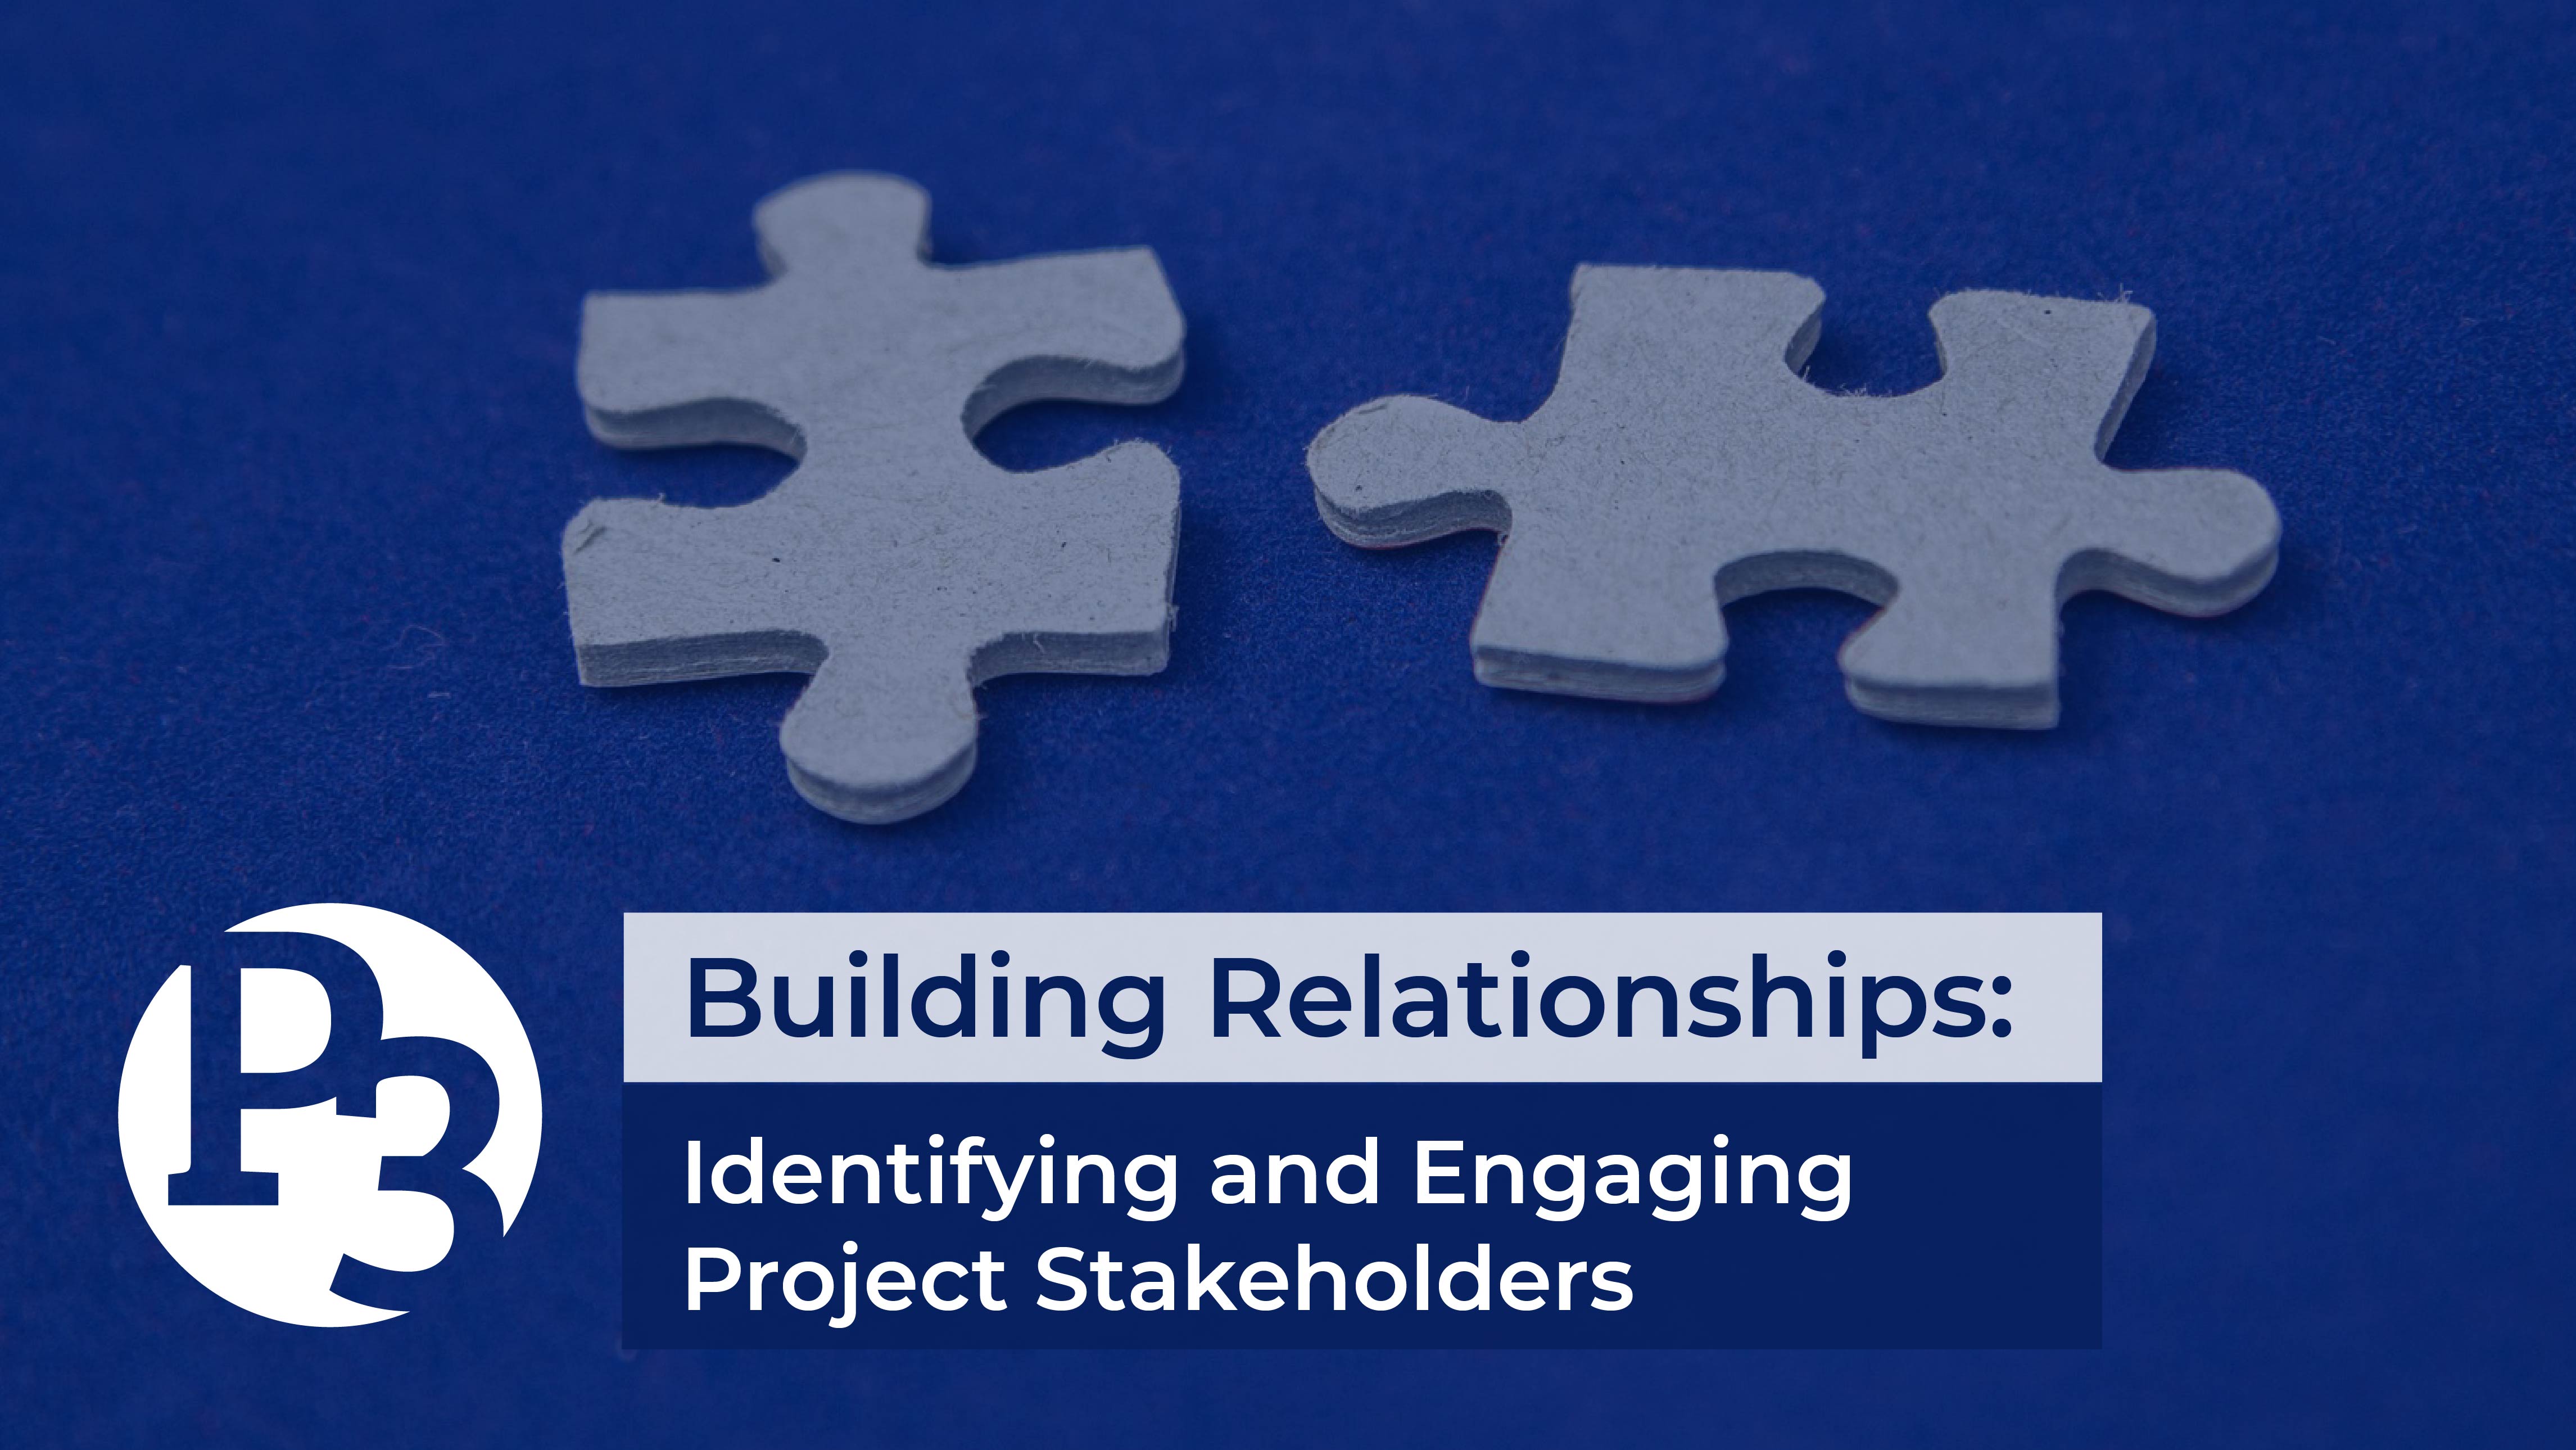 Building Relationships: Identifying and Engaging Project Stakeholders